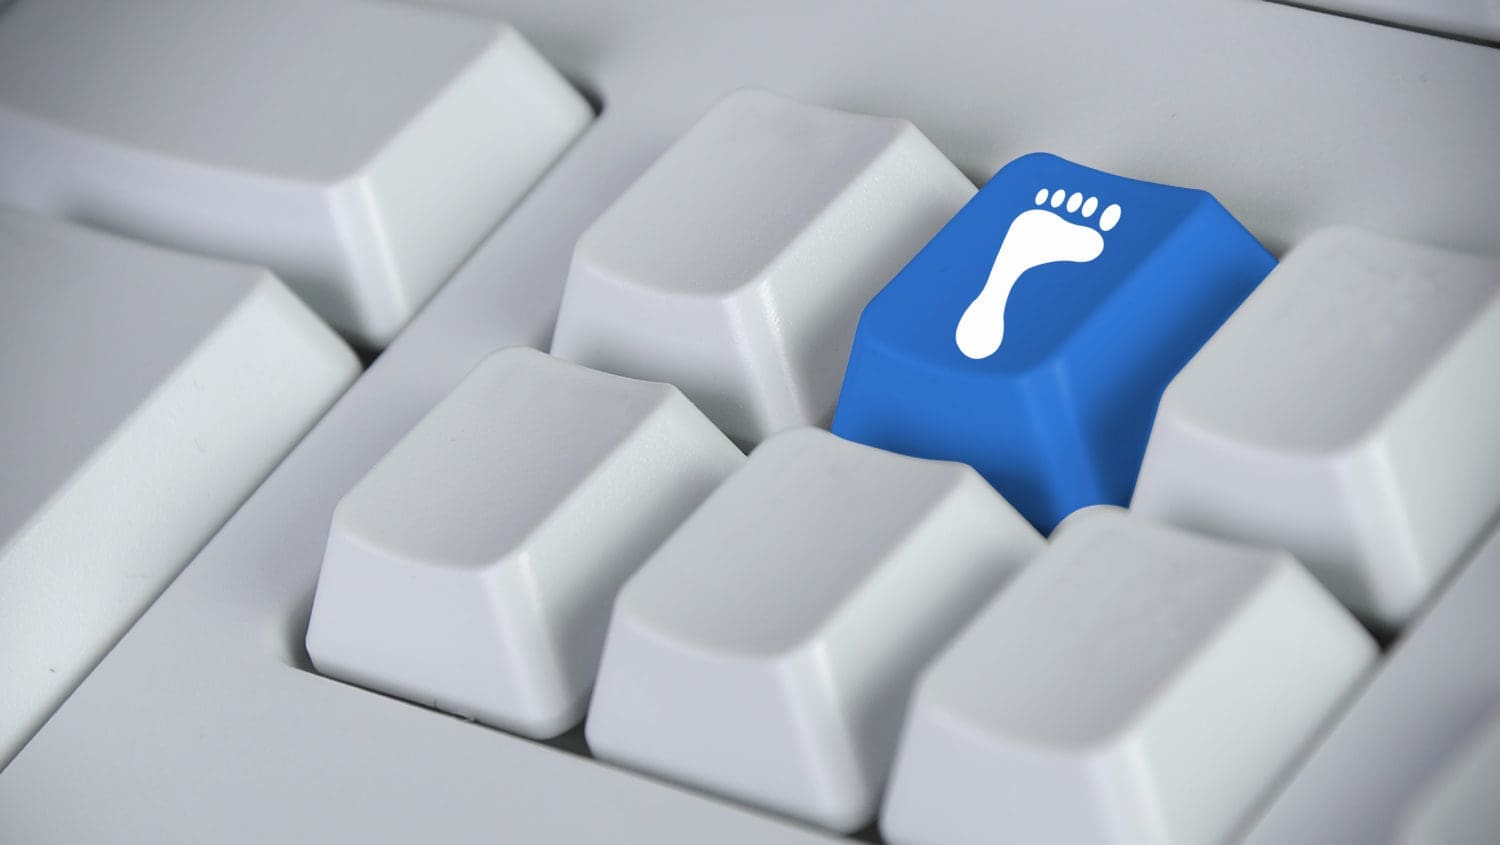 A blue button with a foot on it on a computer keyboard.